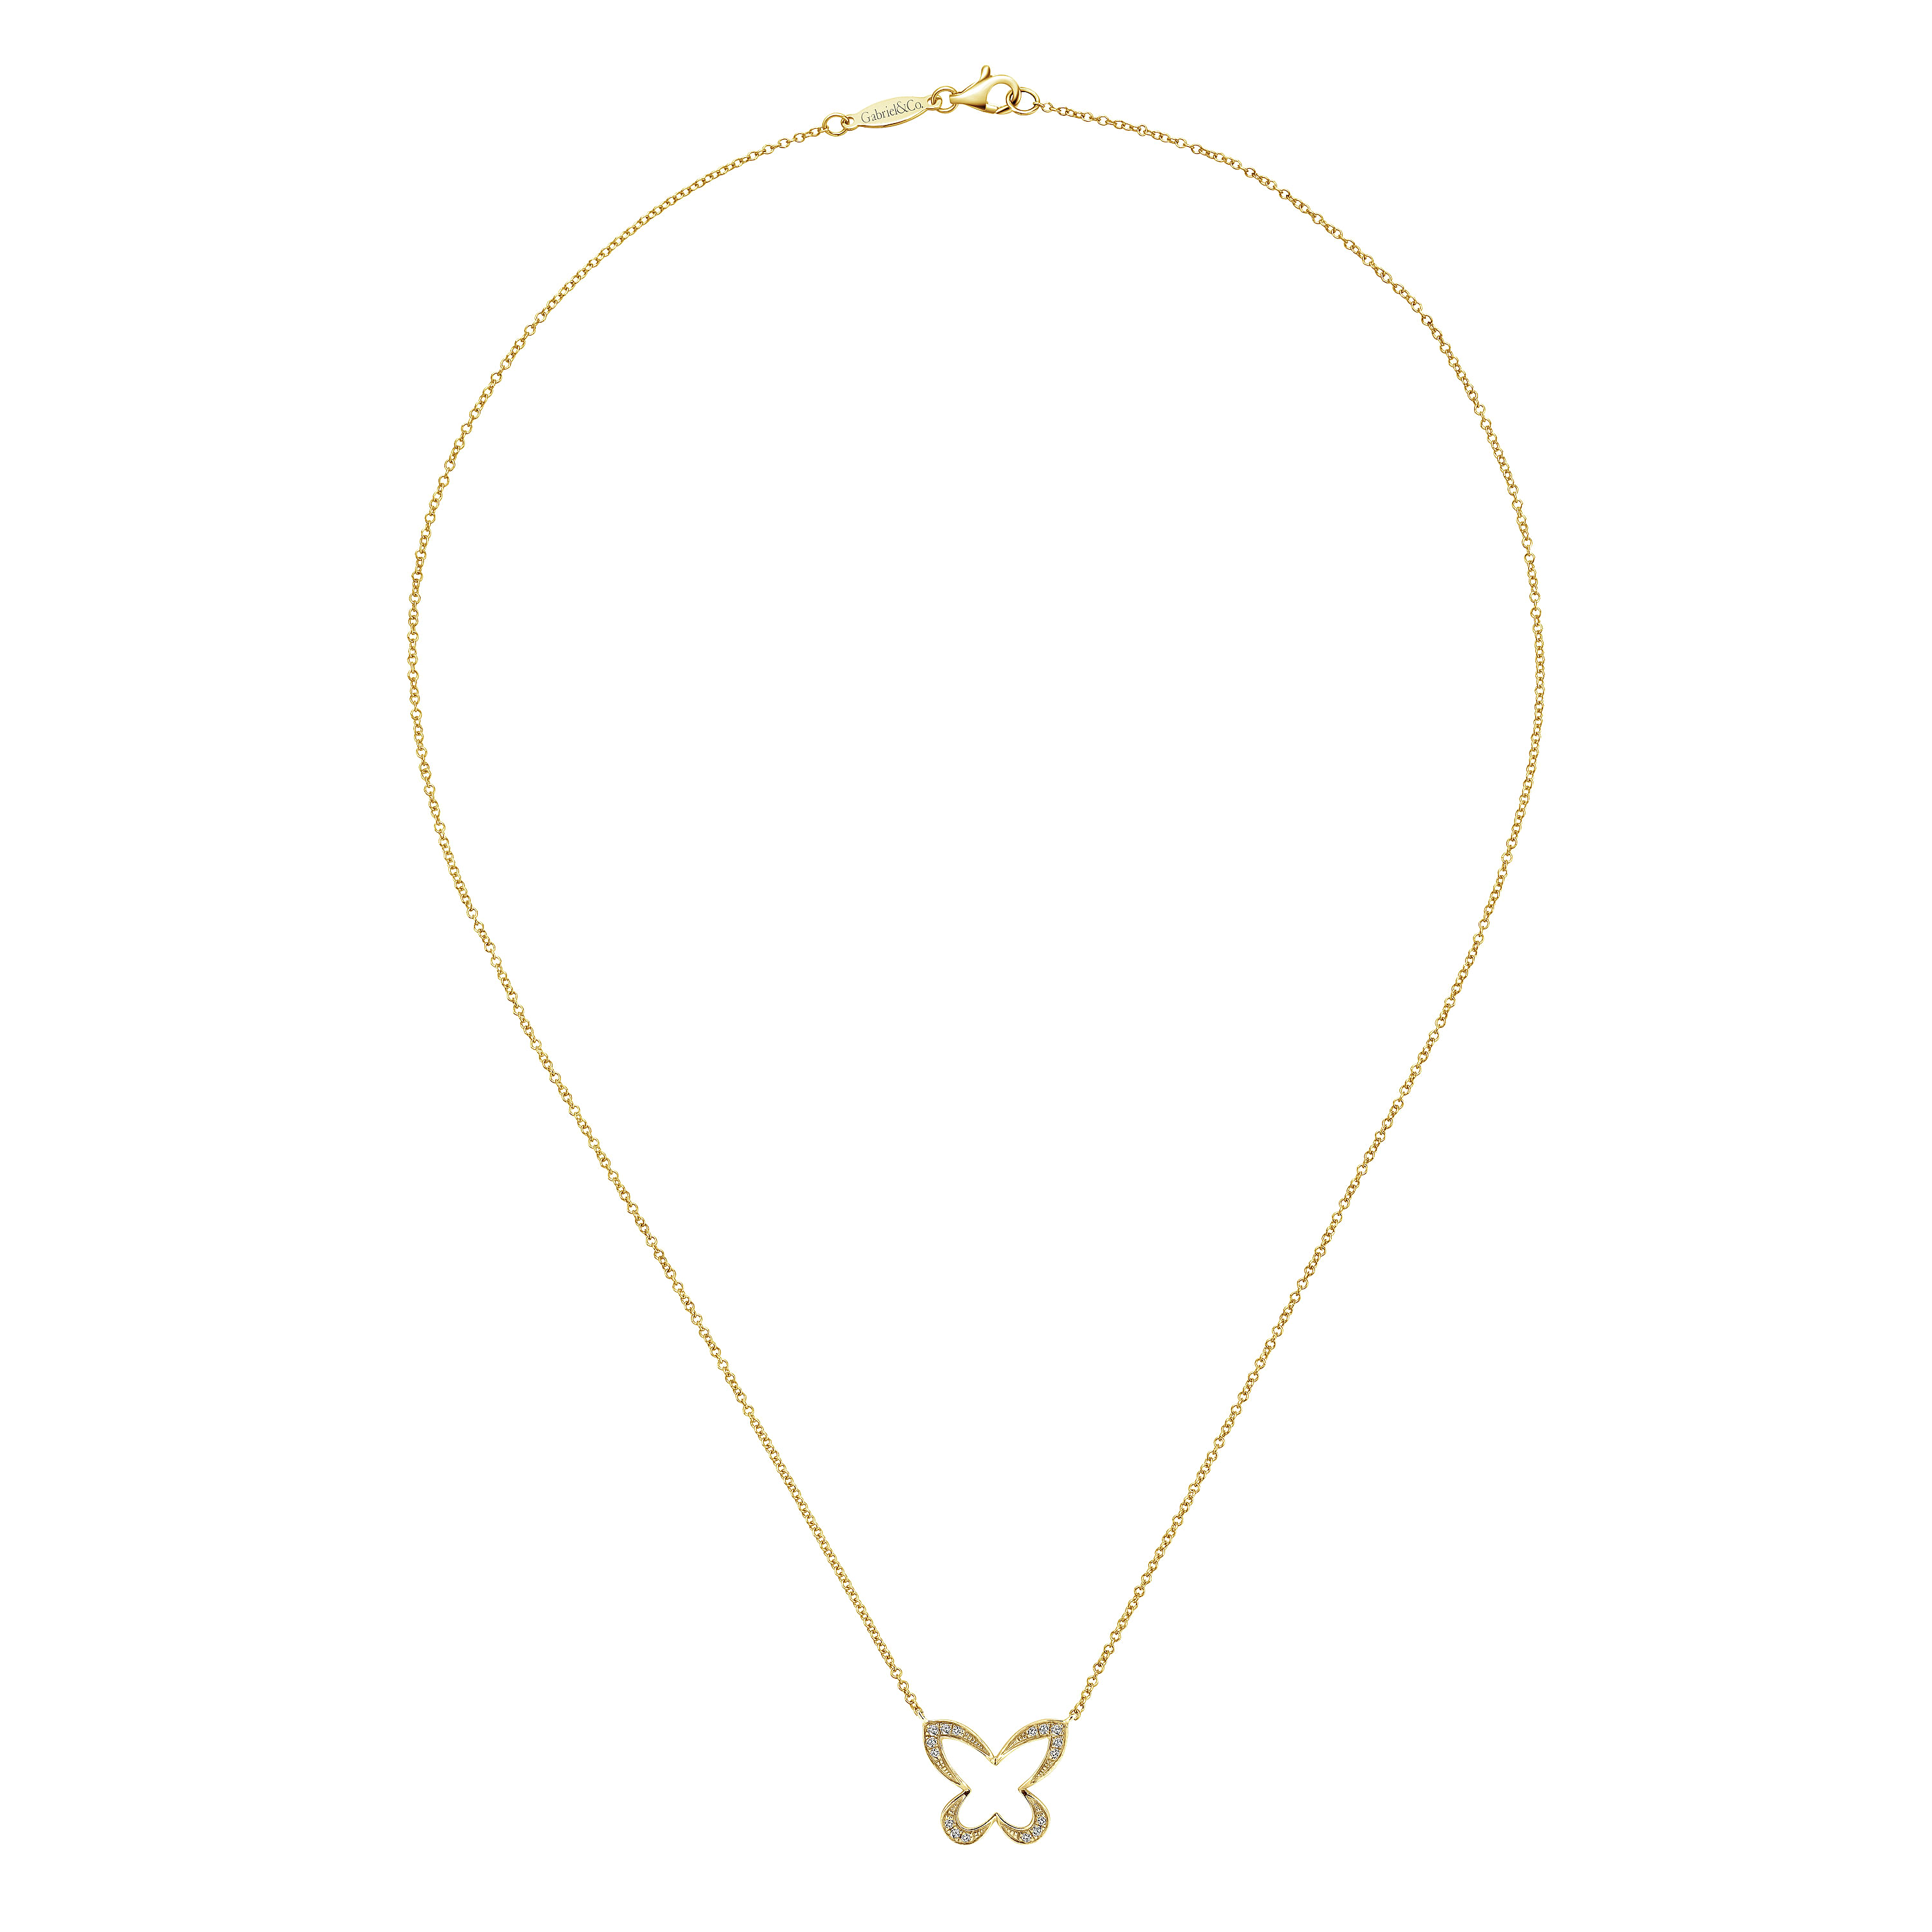 18 inch 14K Yellow Gold Open Diamond Butterfly Pendant Necklace